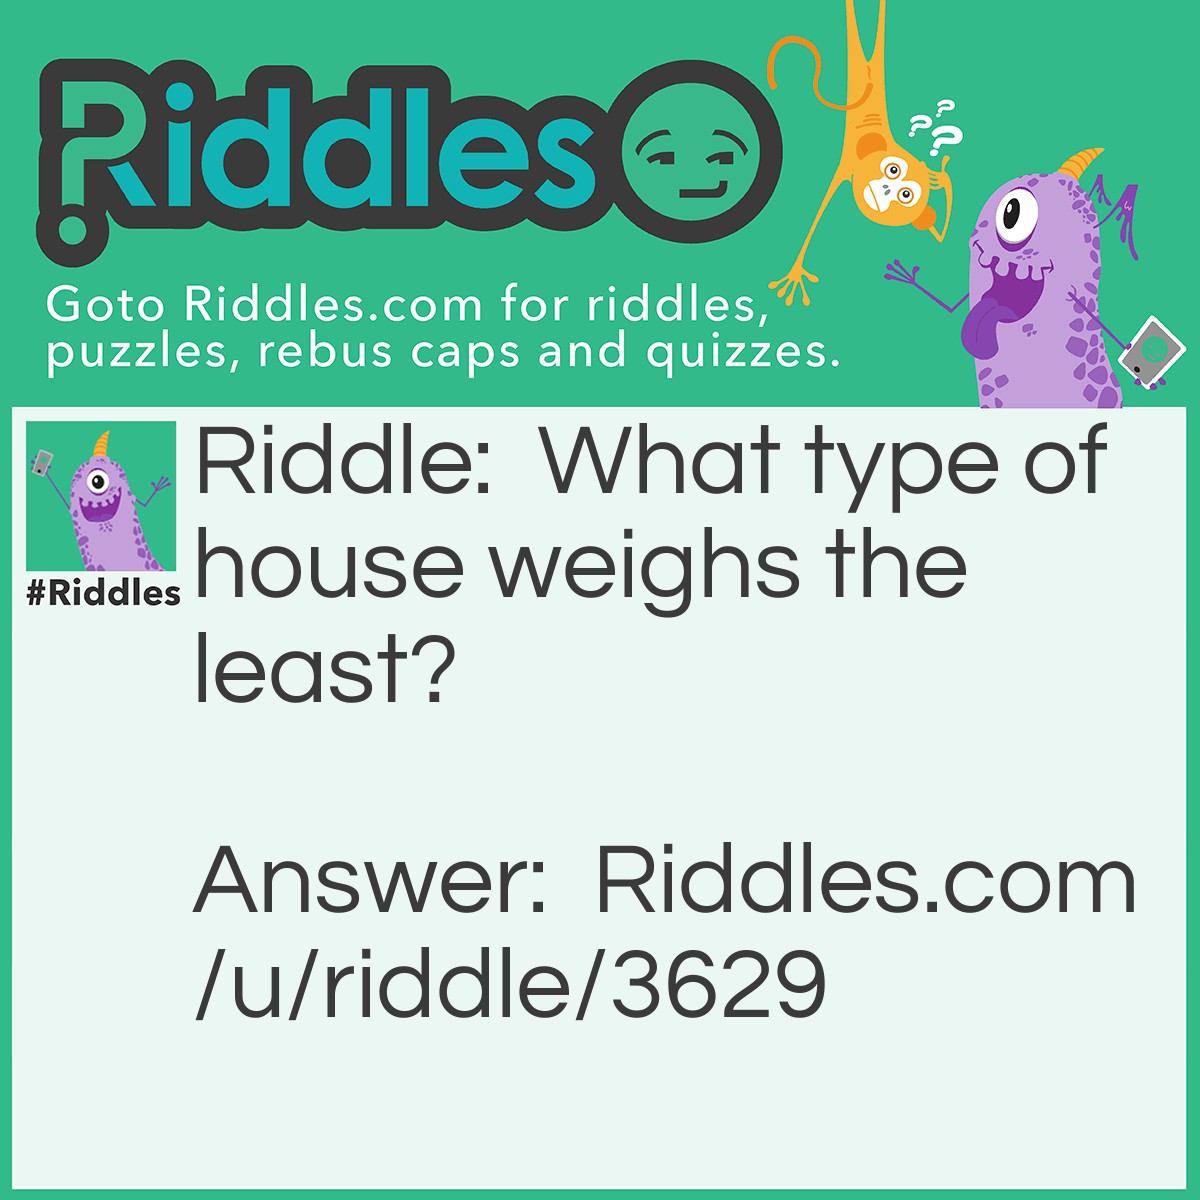 Riddle: What type of house weighs the least? Answer: A lighthouse.